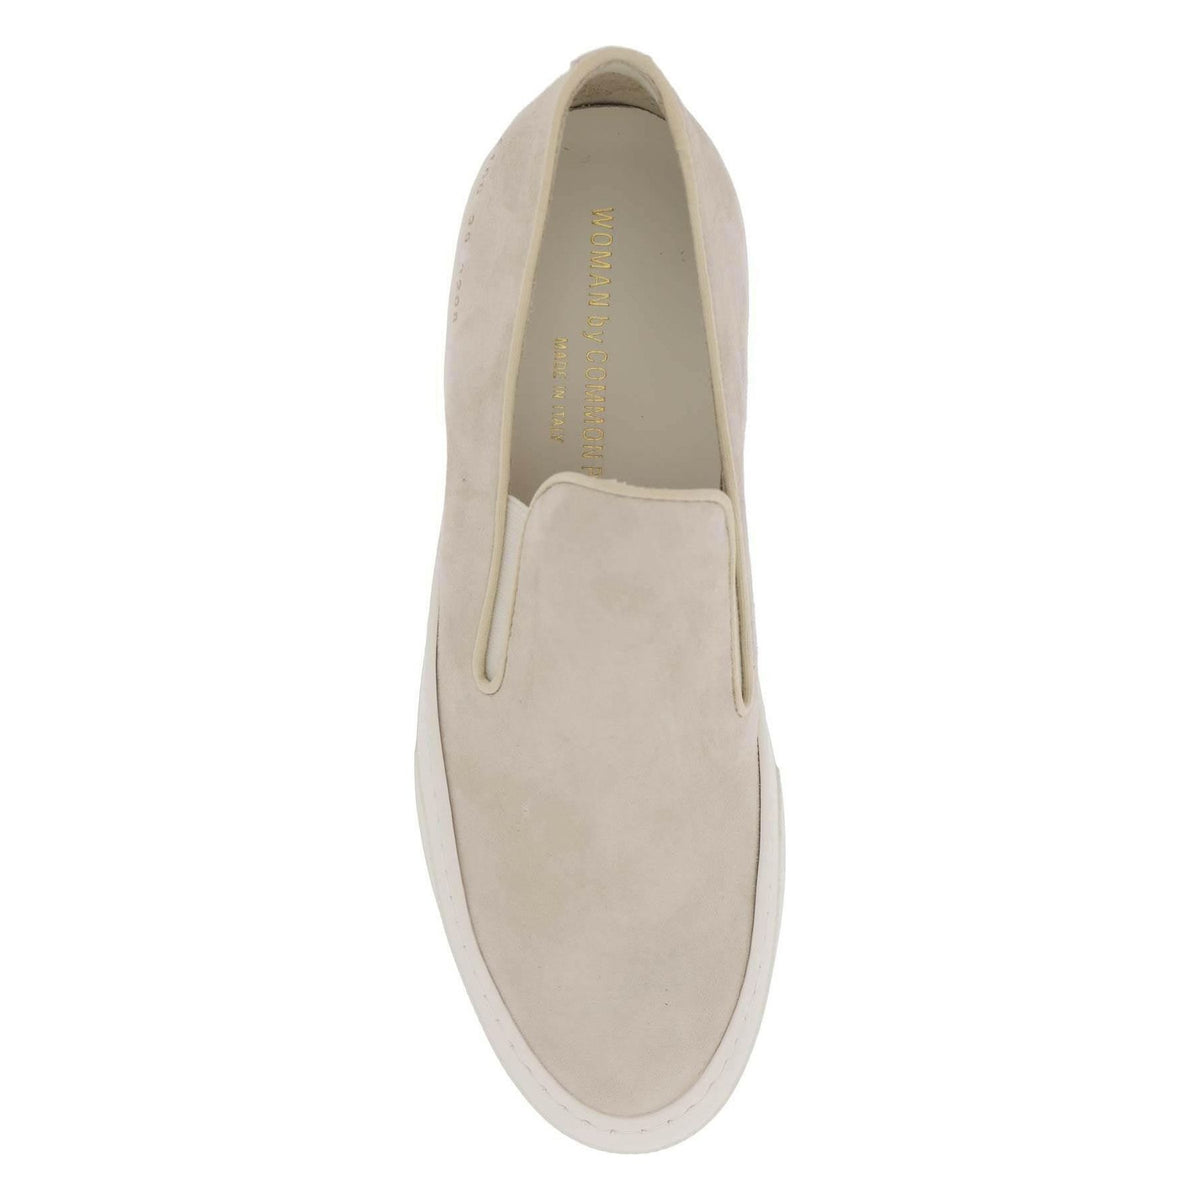 COMMON PROJECTS - Suede Slip-On Sneakers - JOHN JULIA